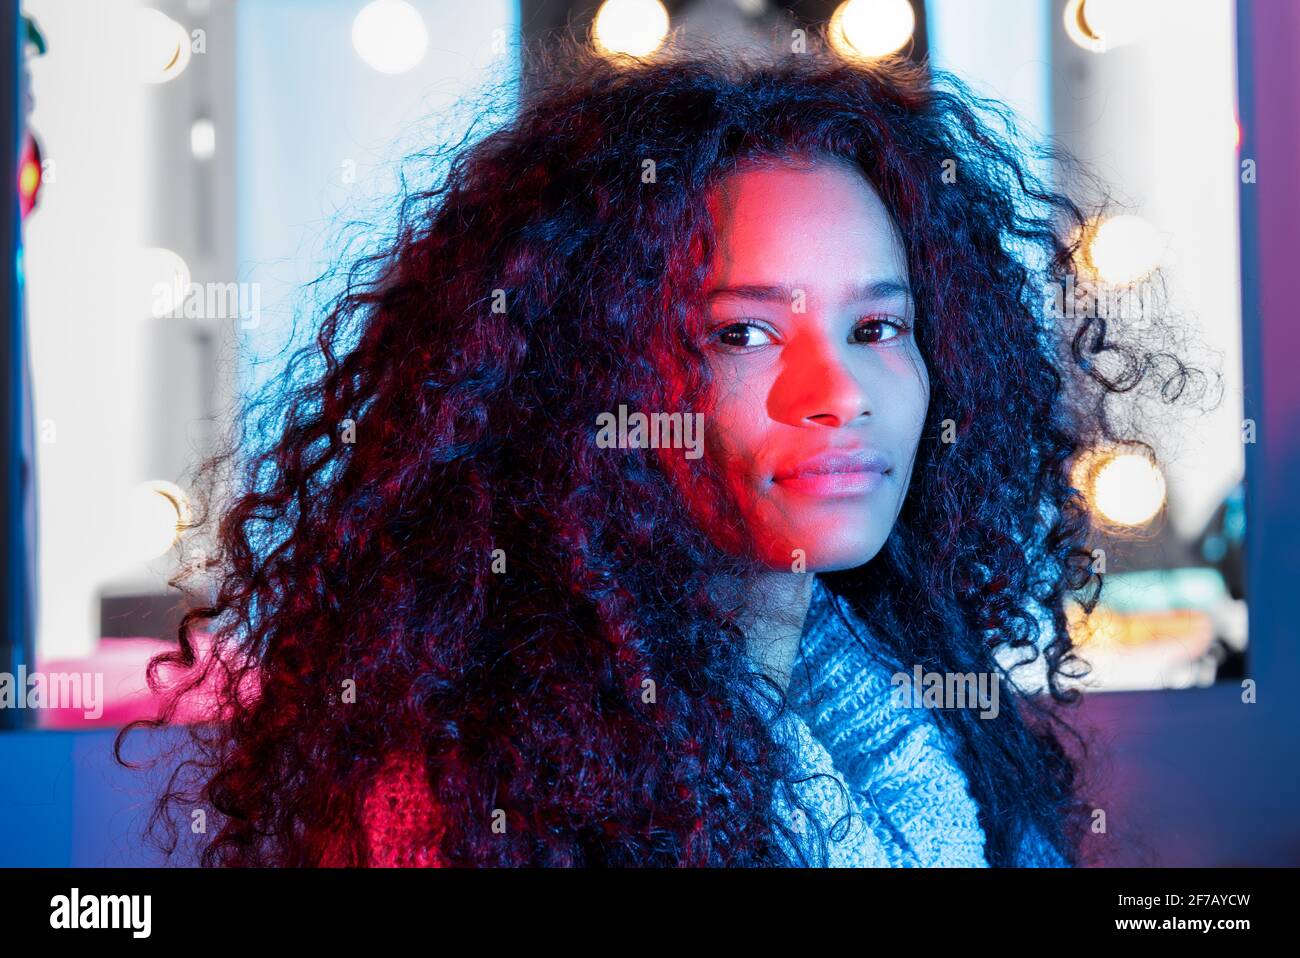 Cute attractive black woman frame by glowing lights with thick curly hair watching the camera with a sideways glance side lit by colorful pink studio Stock Photo